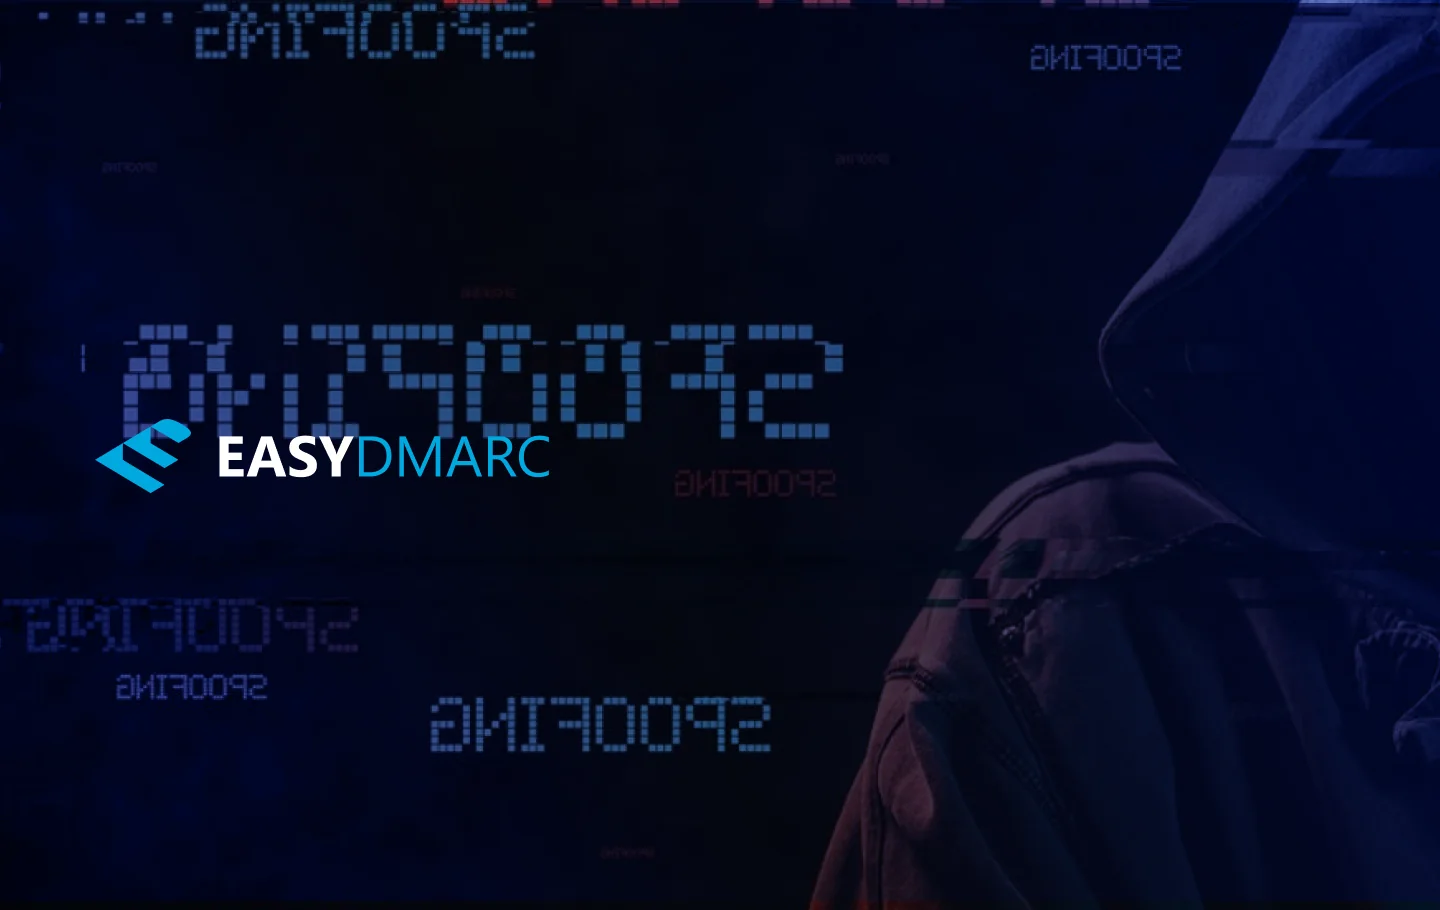 Half of a black-hoodied person in a dark-blue background ,picture covered with the EasyDMARC logo